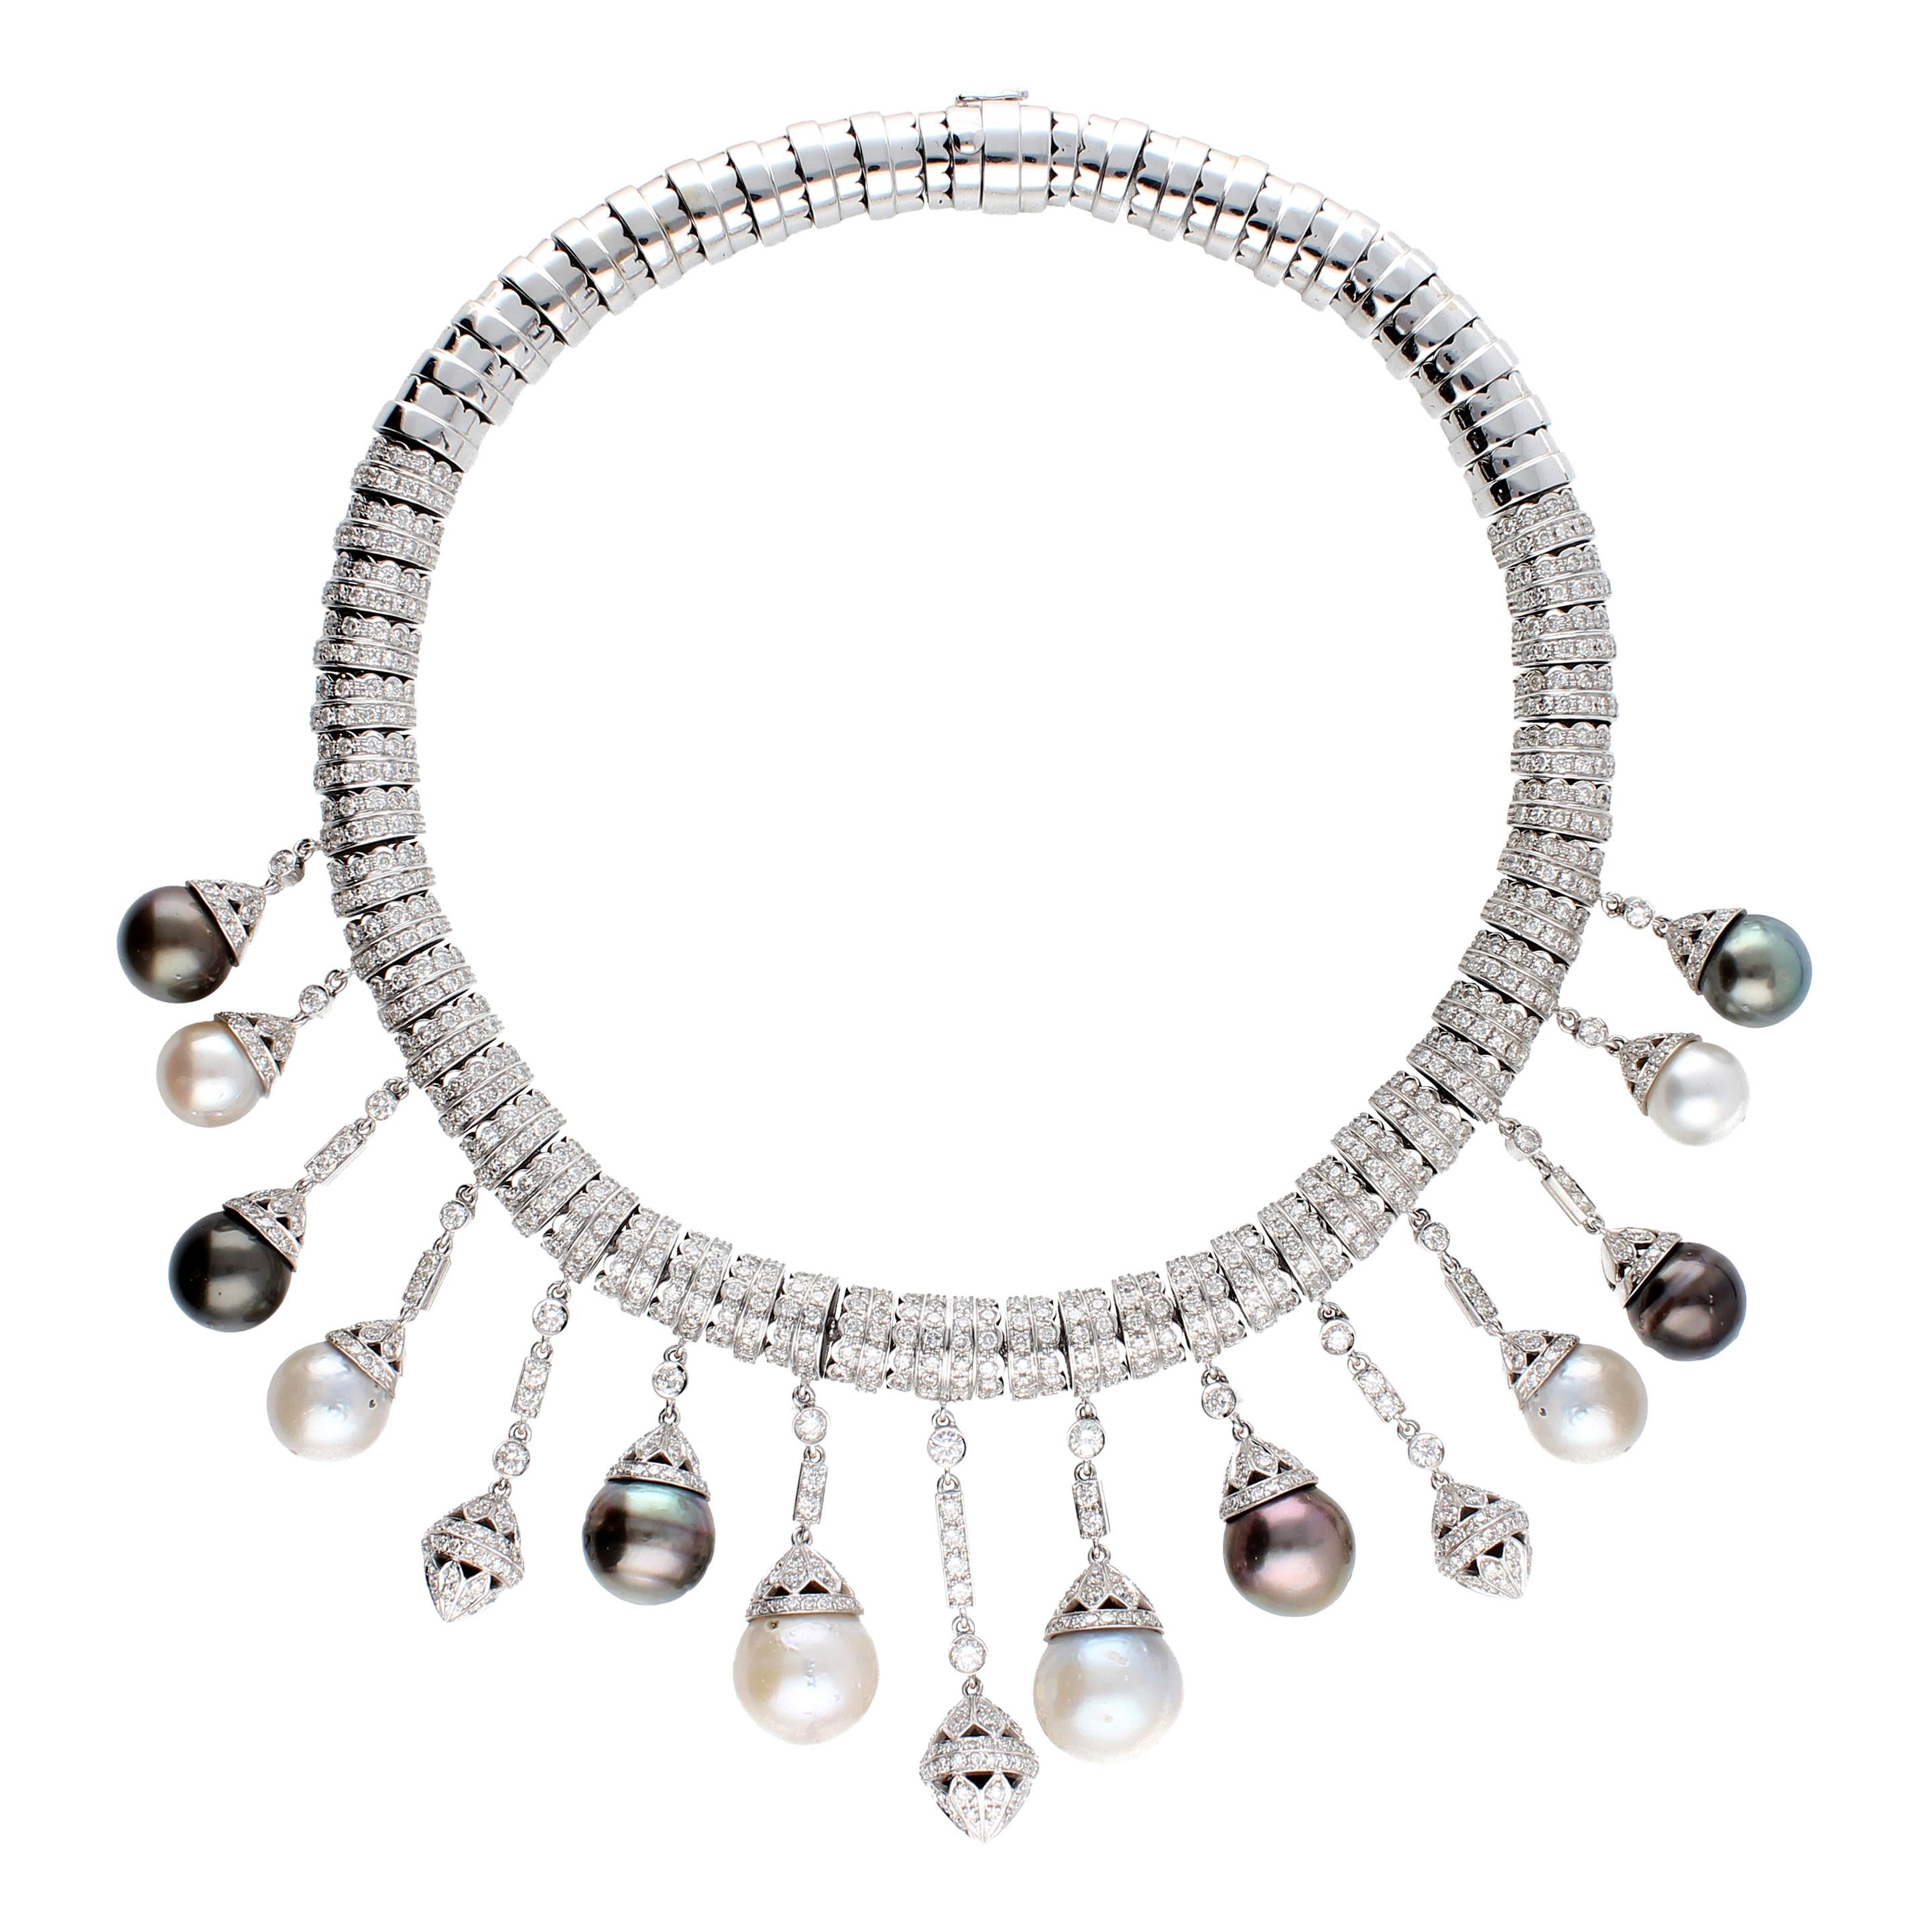 Necklace White Gold and Diamonds, Pendants with White and Black Pearls S.S. For Sale